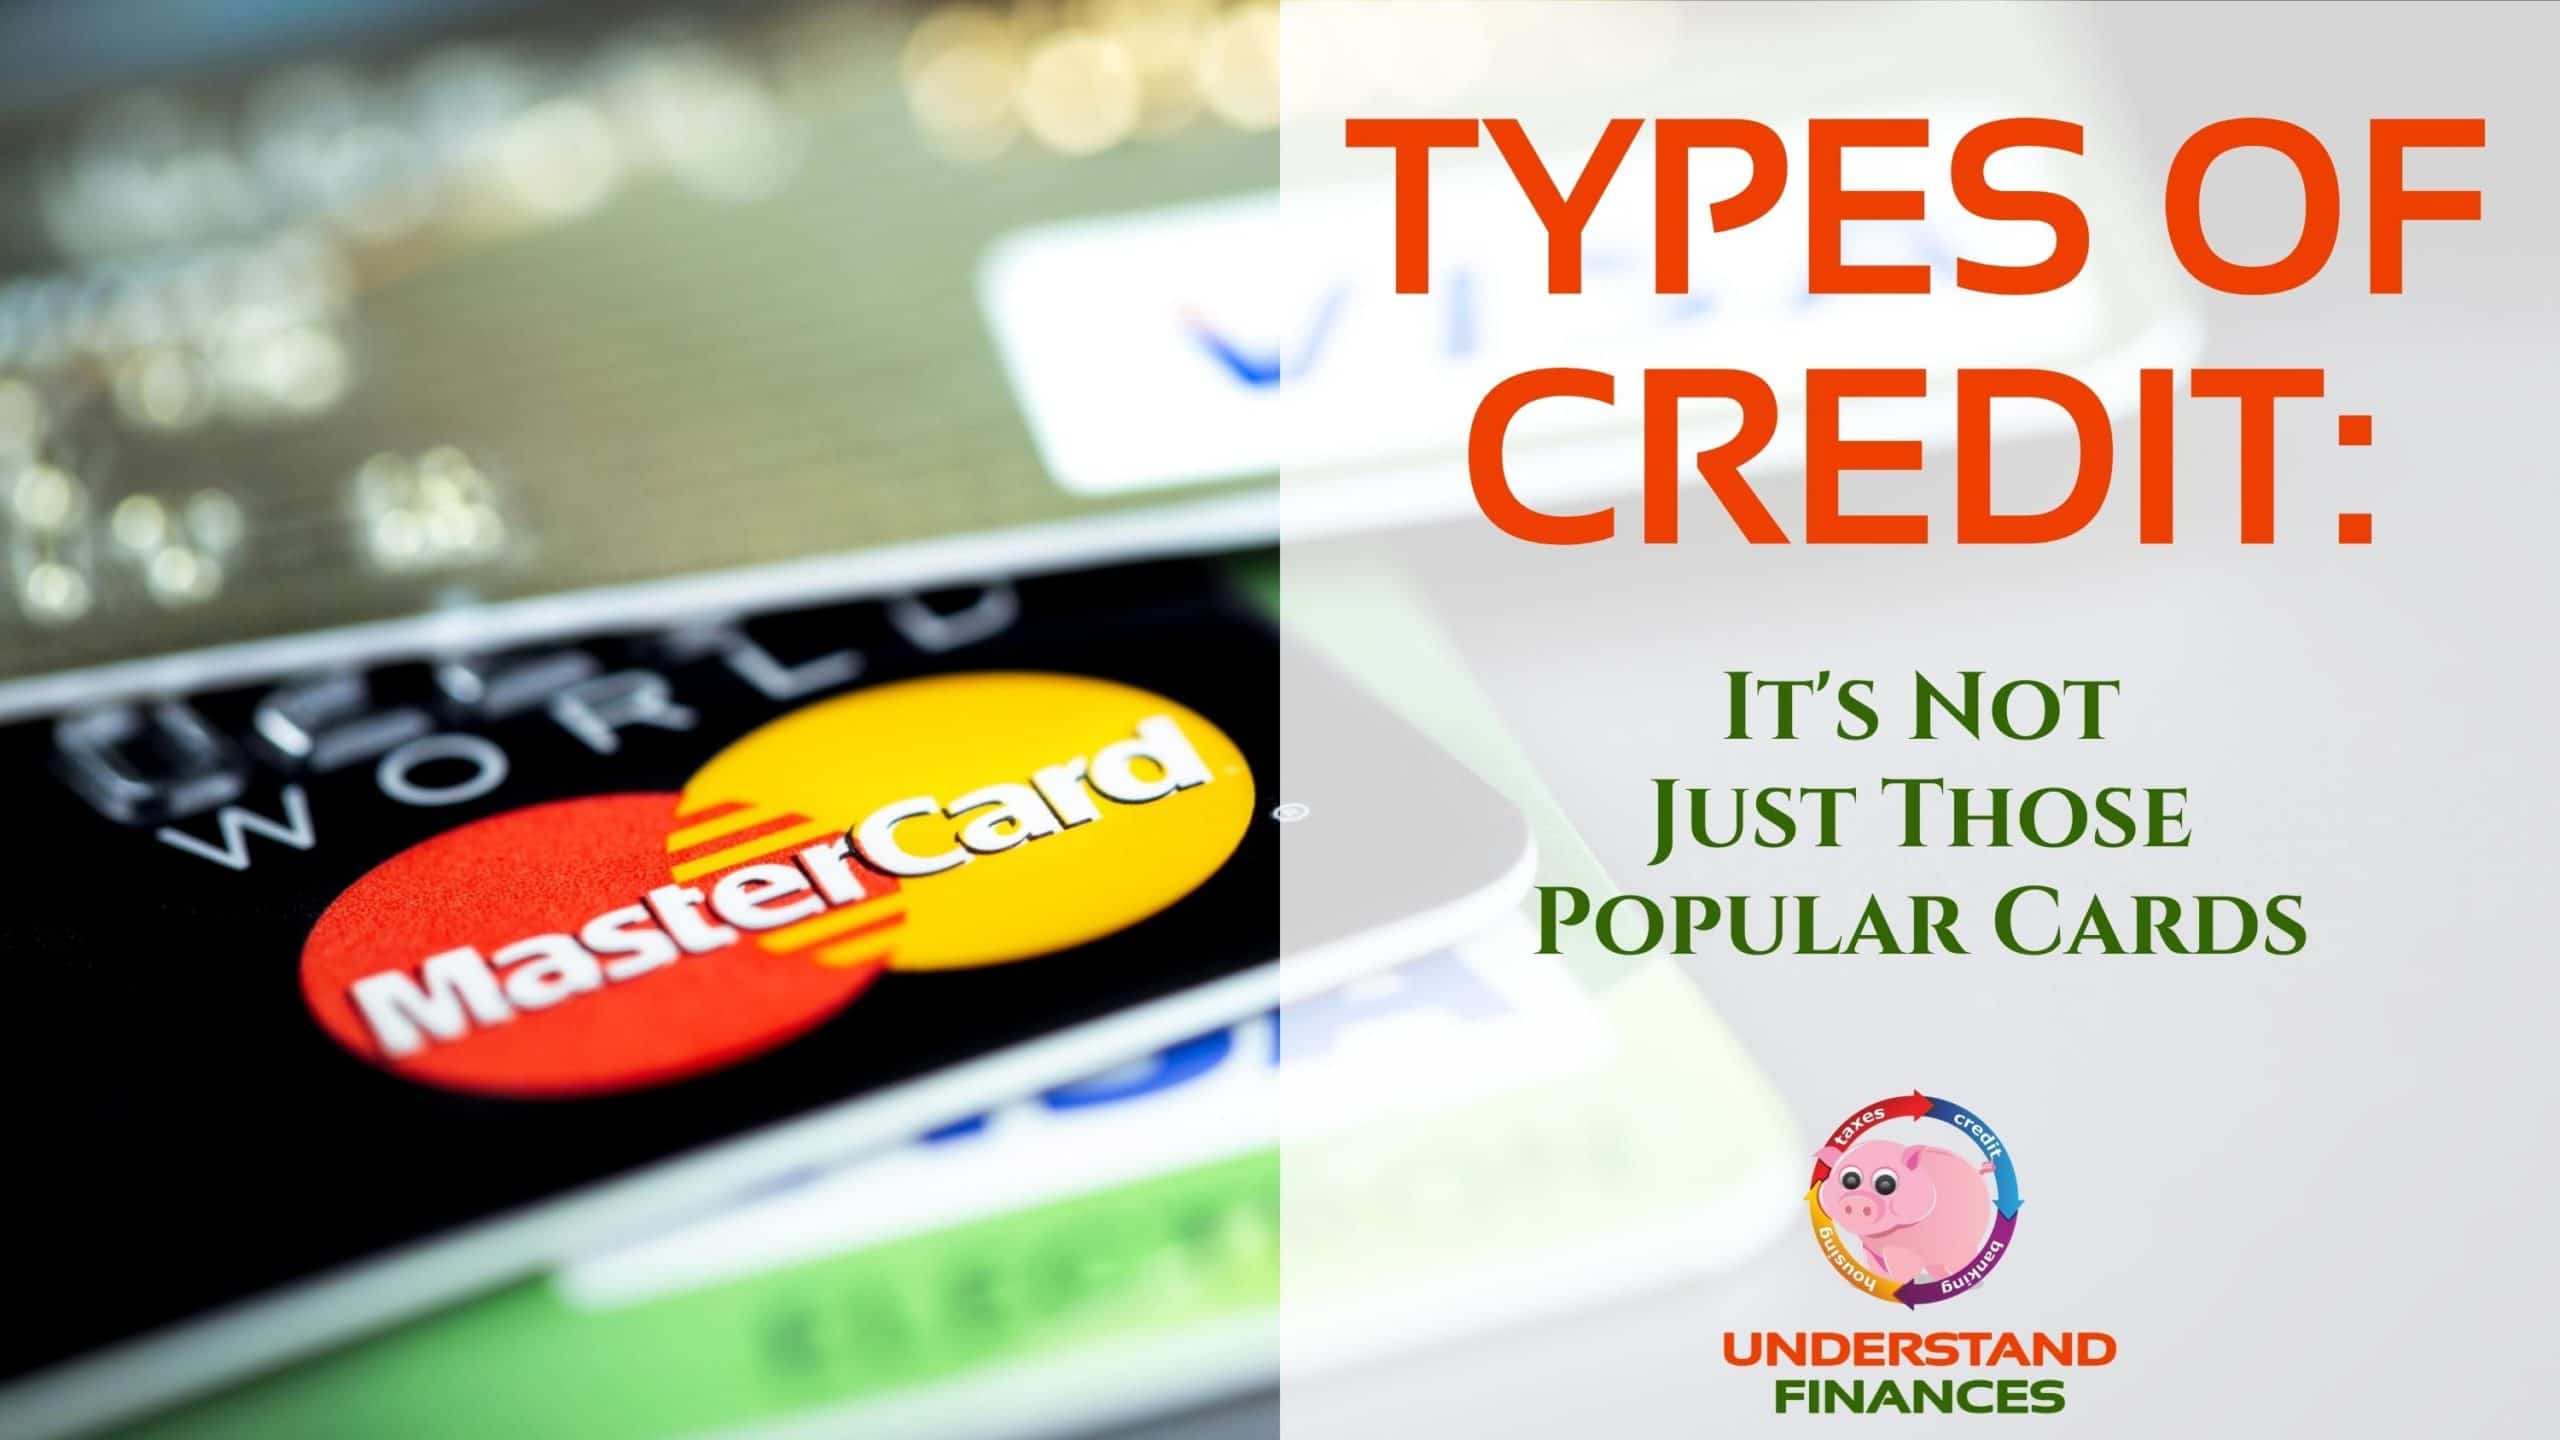 Types Of Credit: It’s Not Just Those Popular Cards!